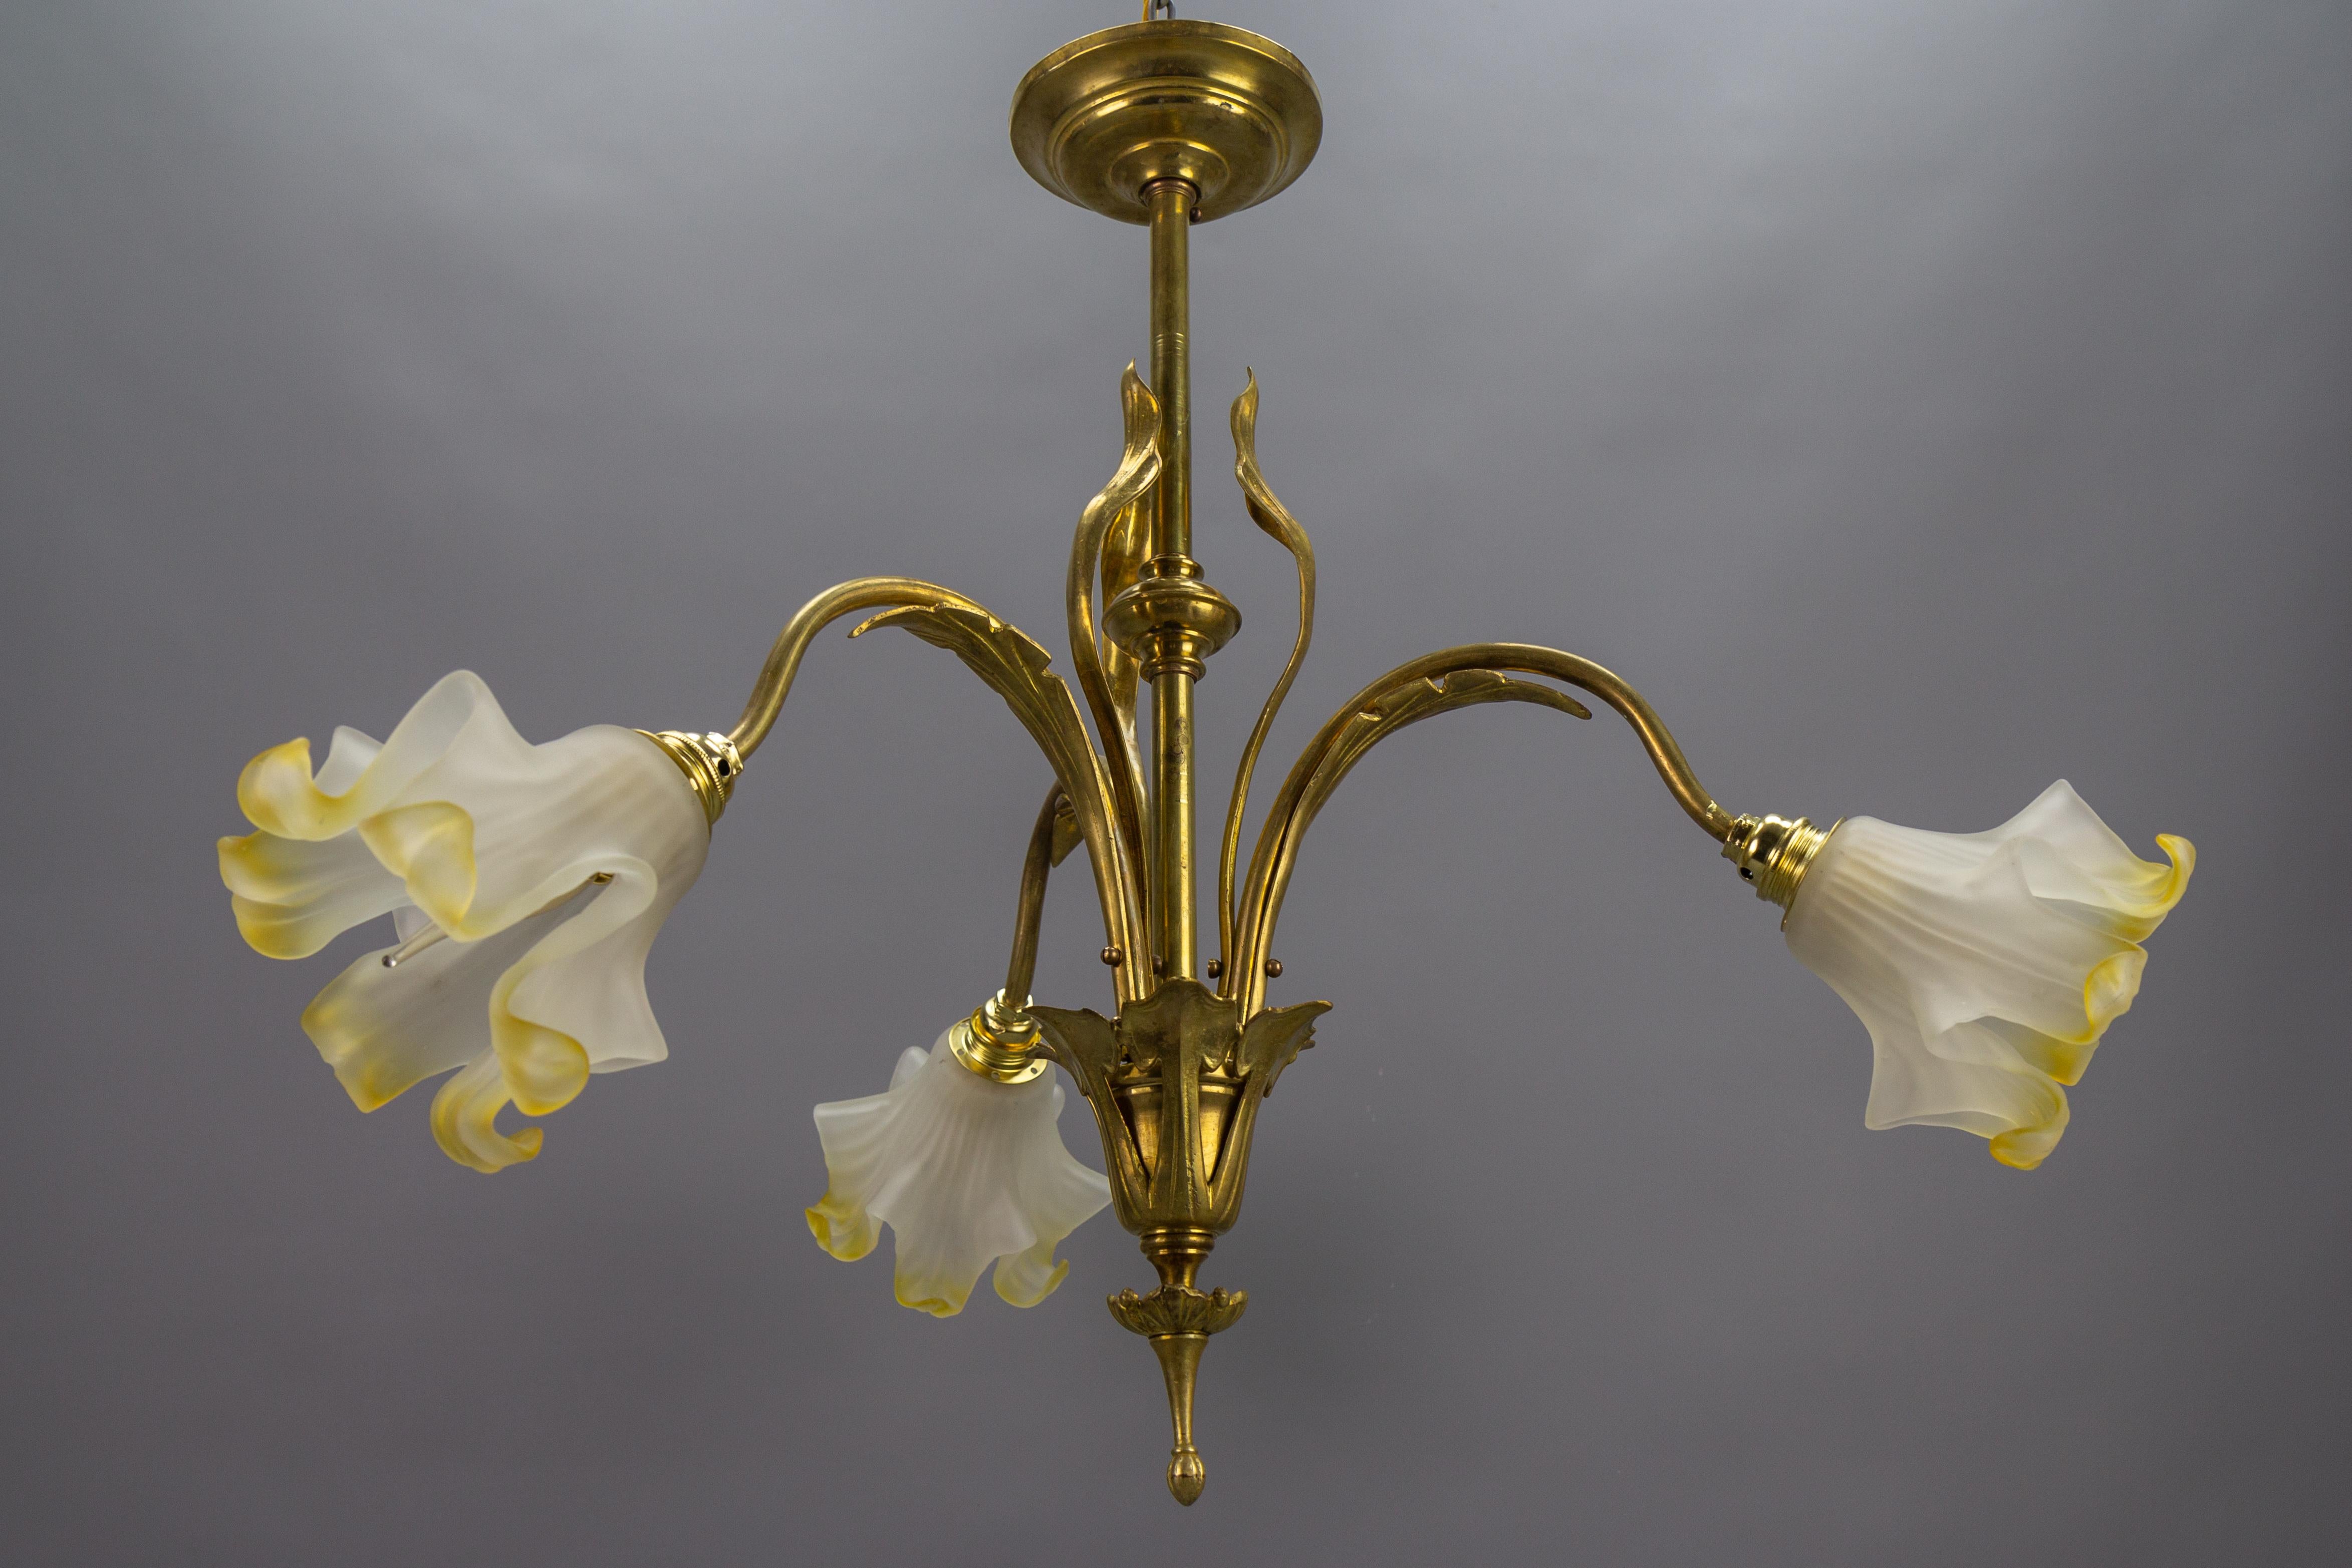 French Art Nouveau Brass and Glass Three-Light Iris-Shaped Chandelier, ca. 1910 For Sale 15